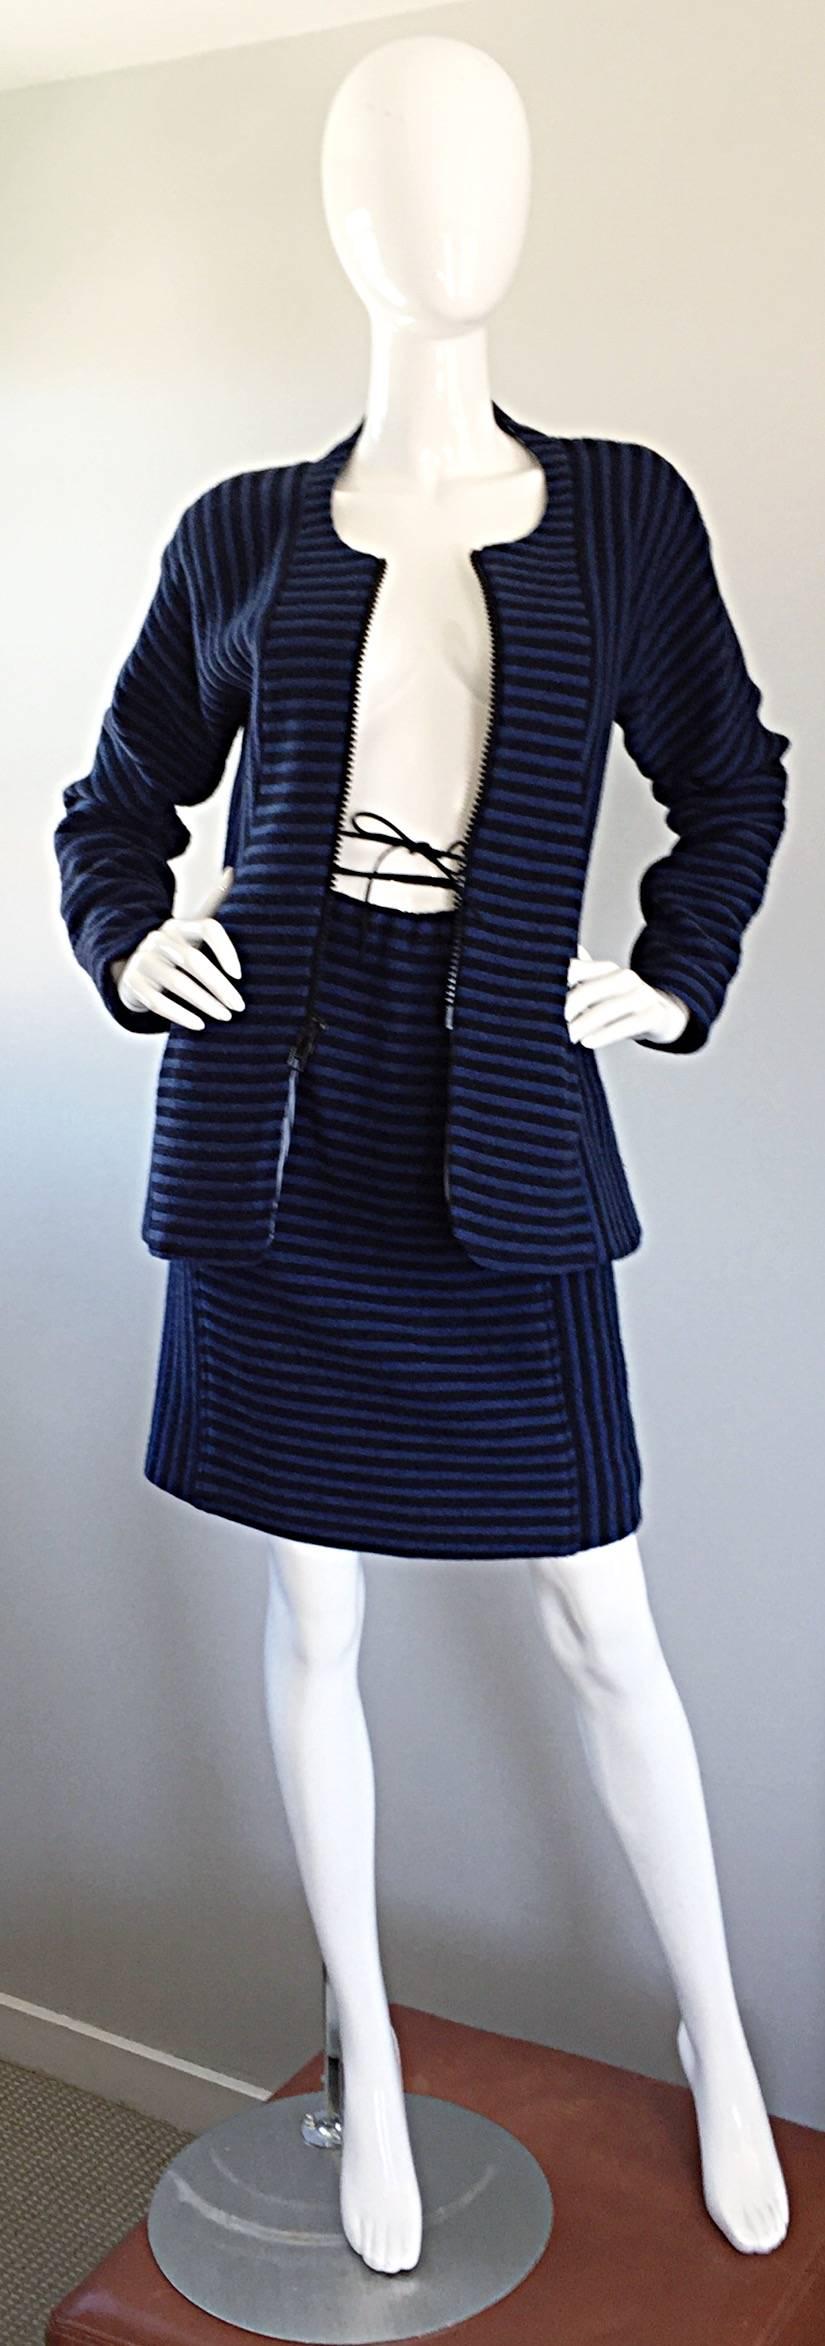 Amazing vintage GEOFFREY BEENE royal blue and black striped wool skirt suit! Features an amazing fitted jacket, with an oversized black zipper up the bodice. Mini skirt features a suede tie that can be wrapped around the waist, or ties above the